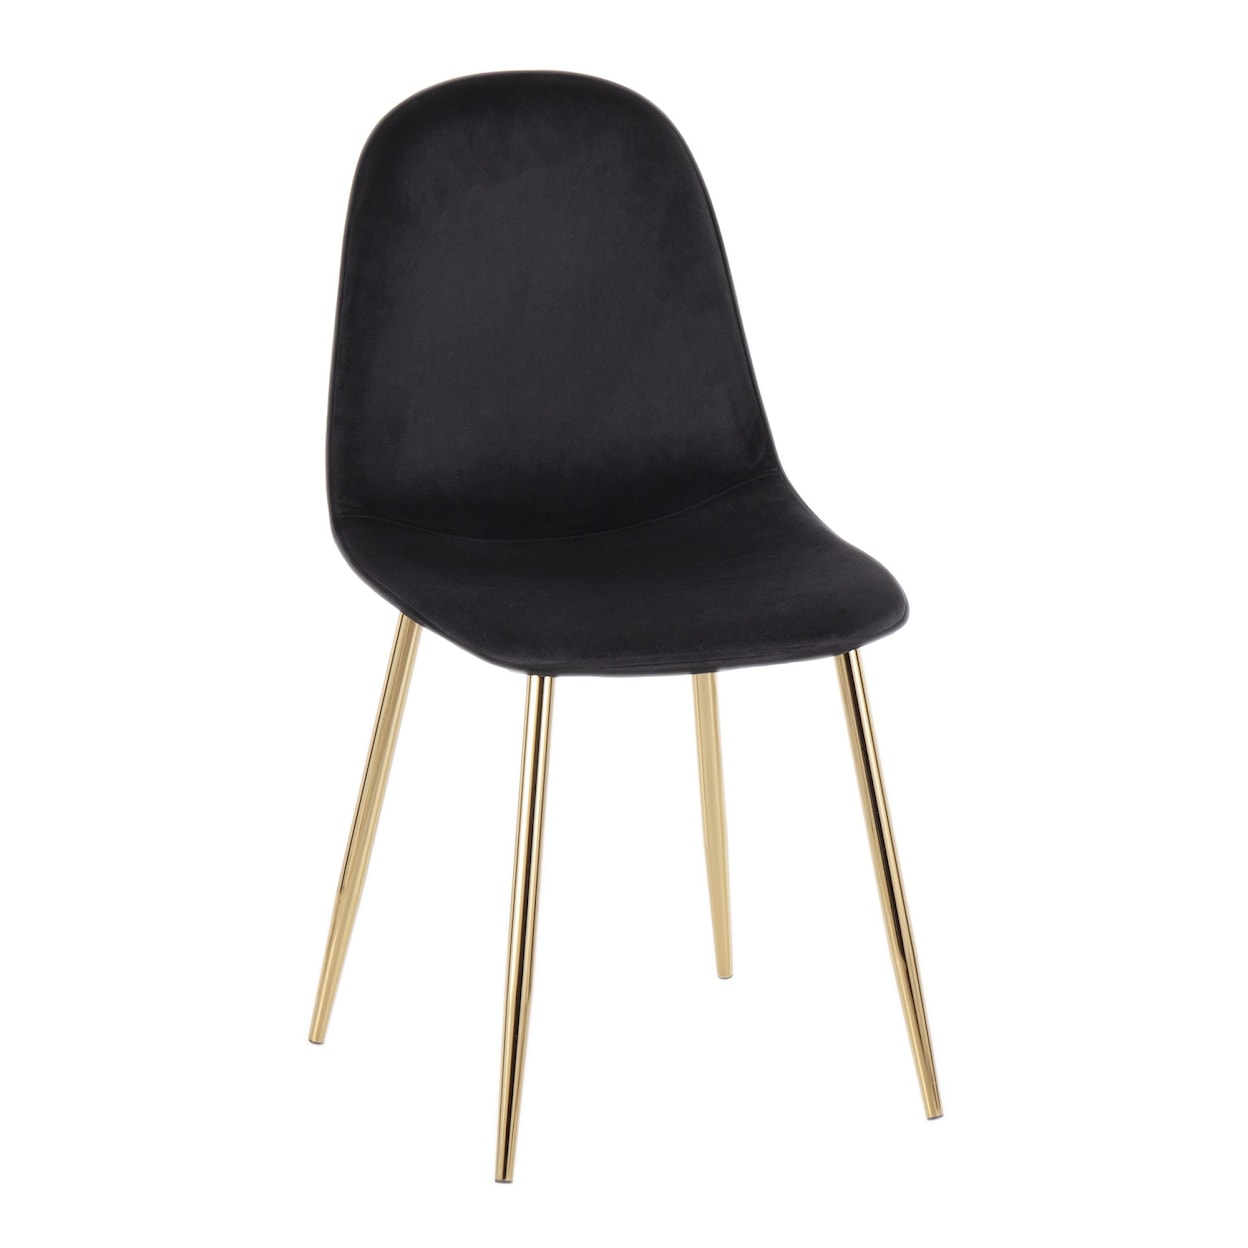 LumiSource Pebble Set of 2 Side Chairs